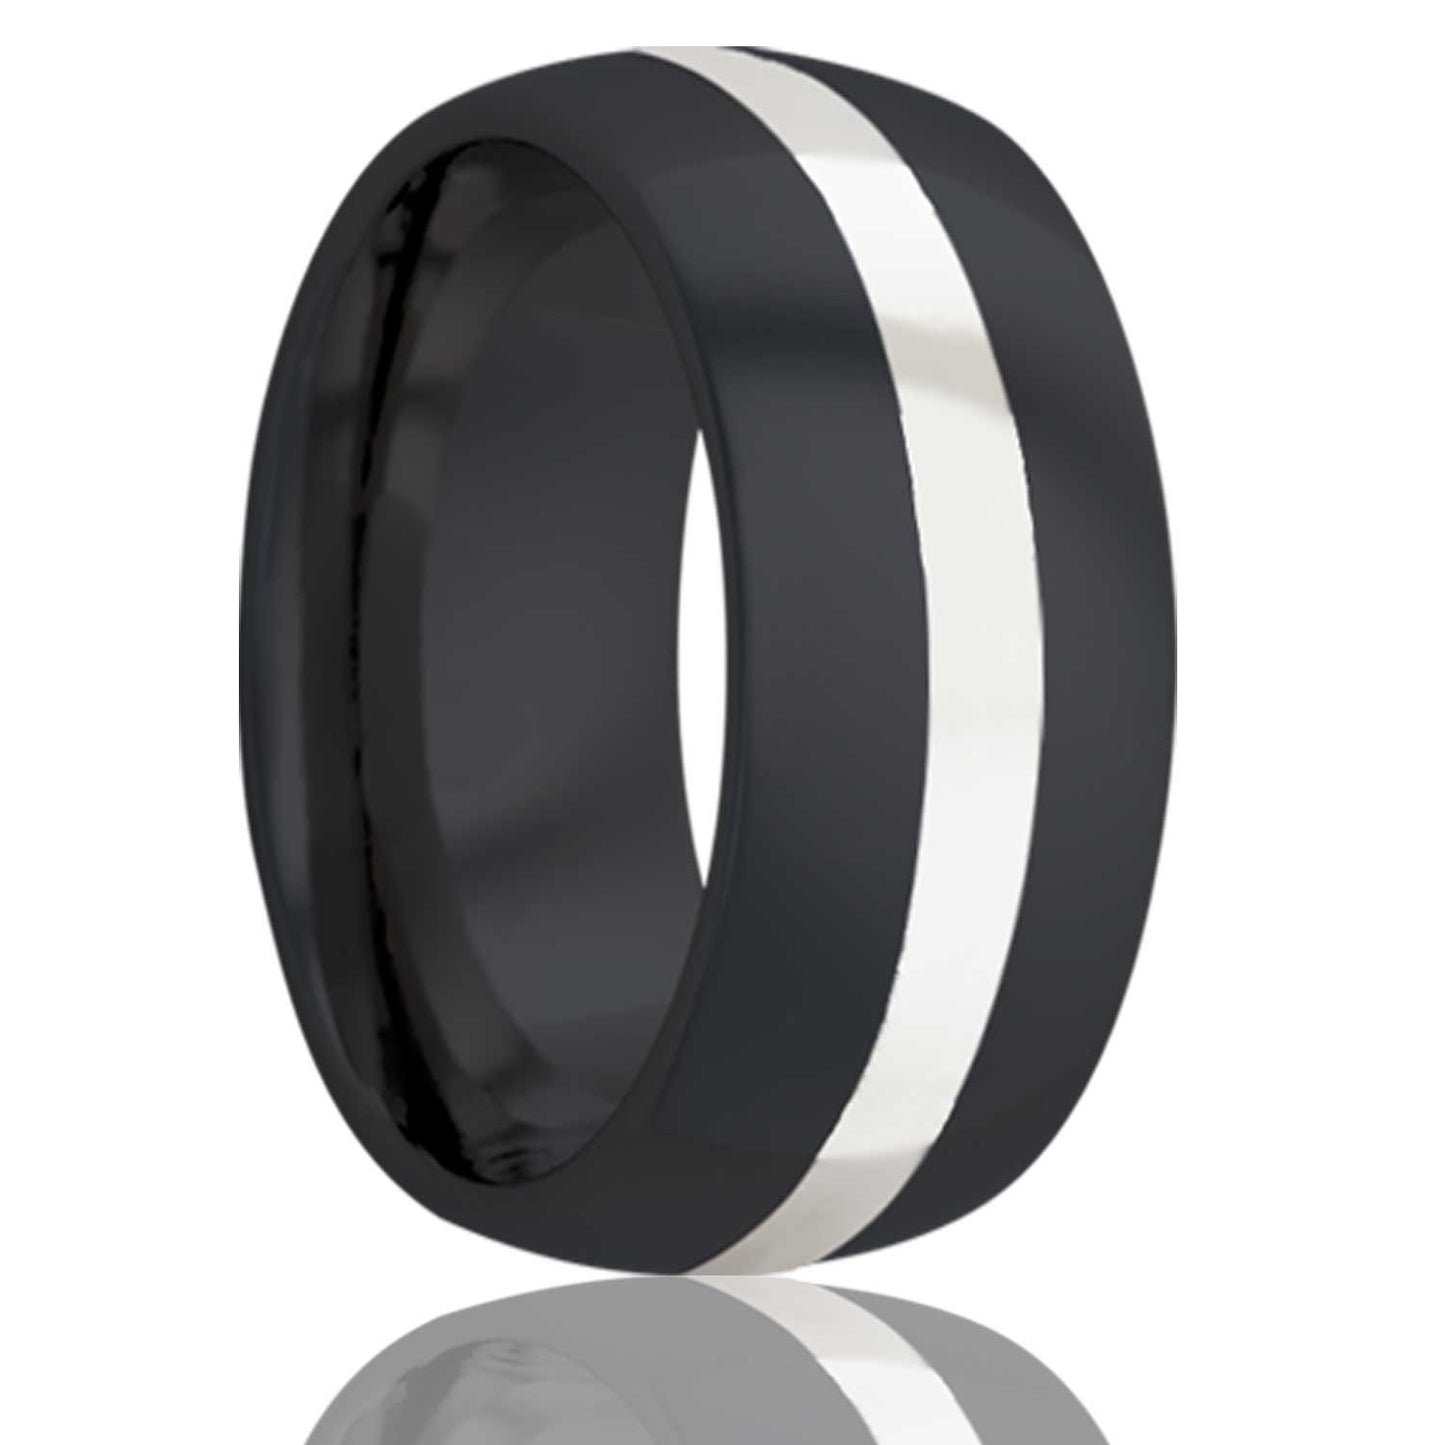 A argentium silver inlay domed zirconium wedding band displayed on a neutral white background.